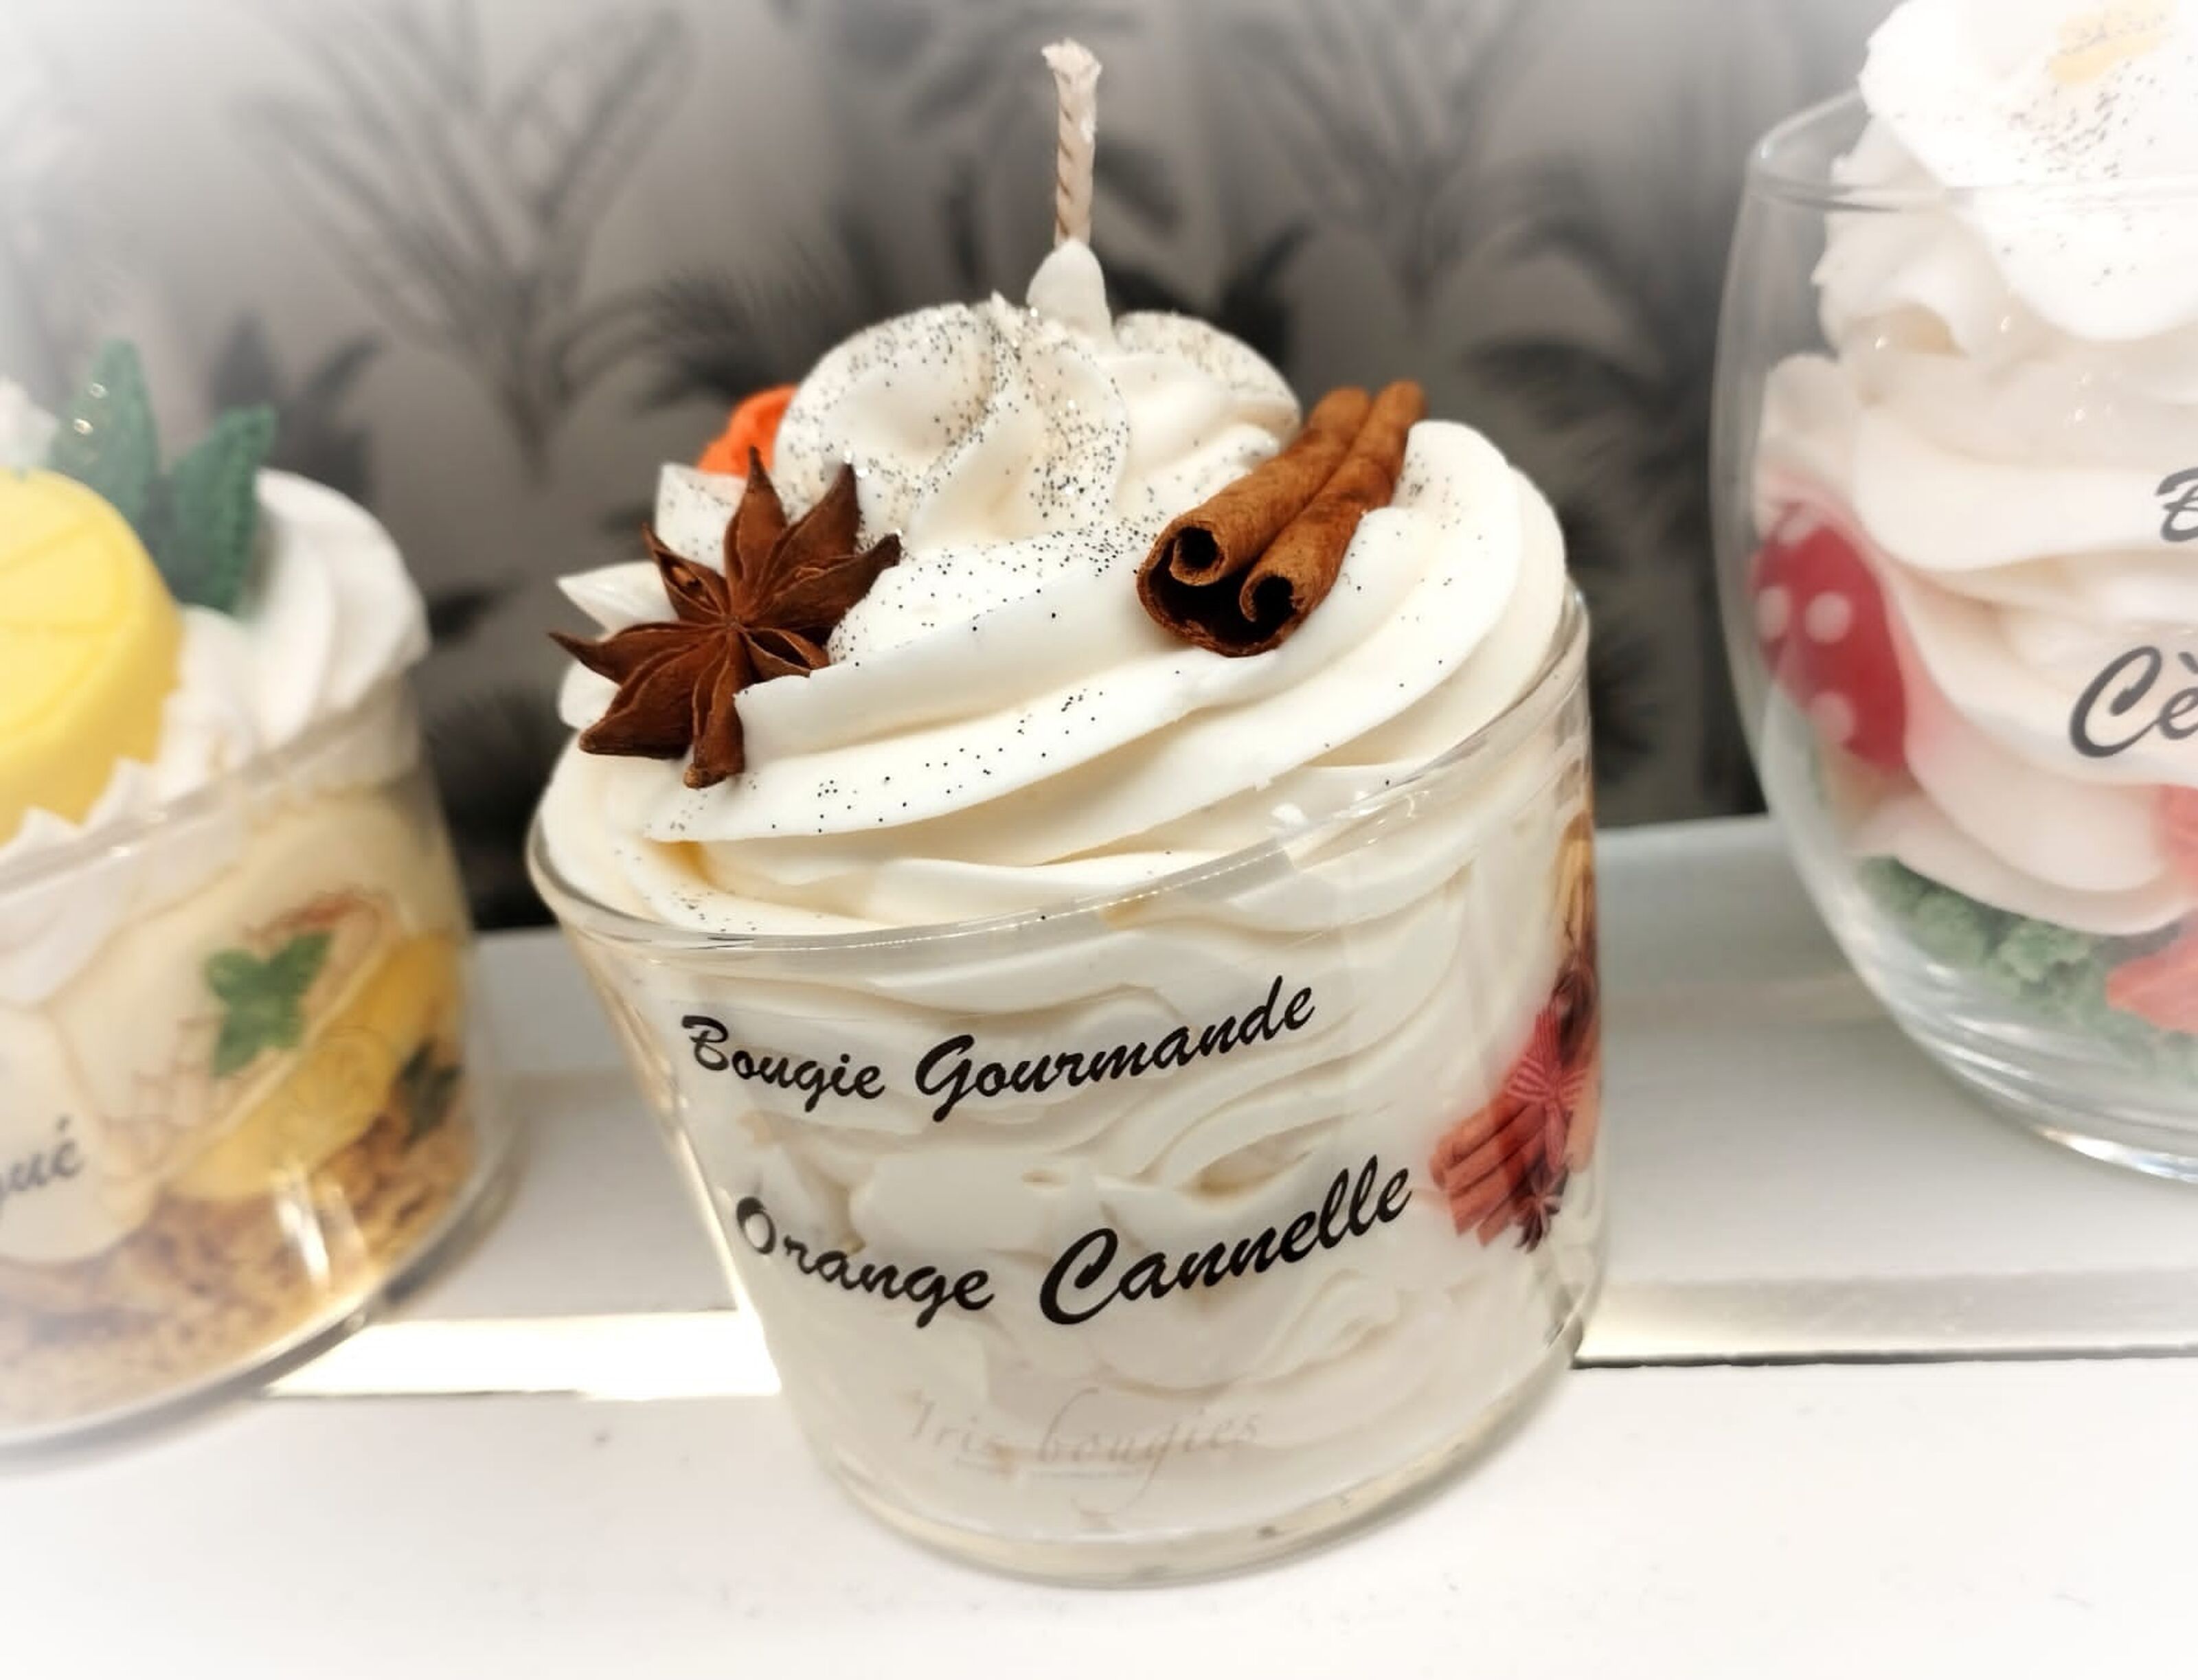 Bougie gourmande - Cannelle